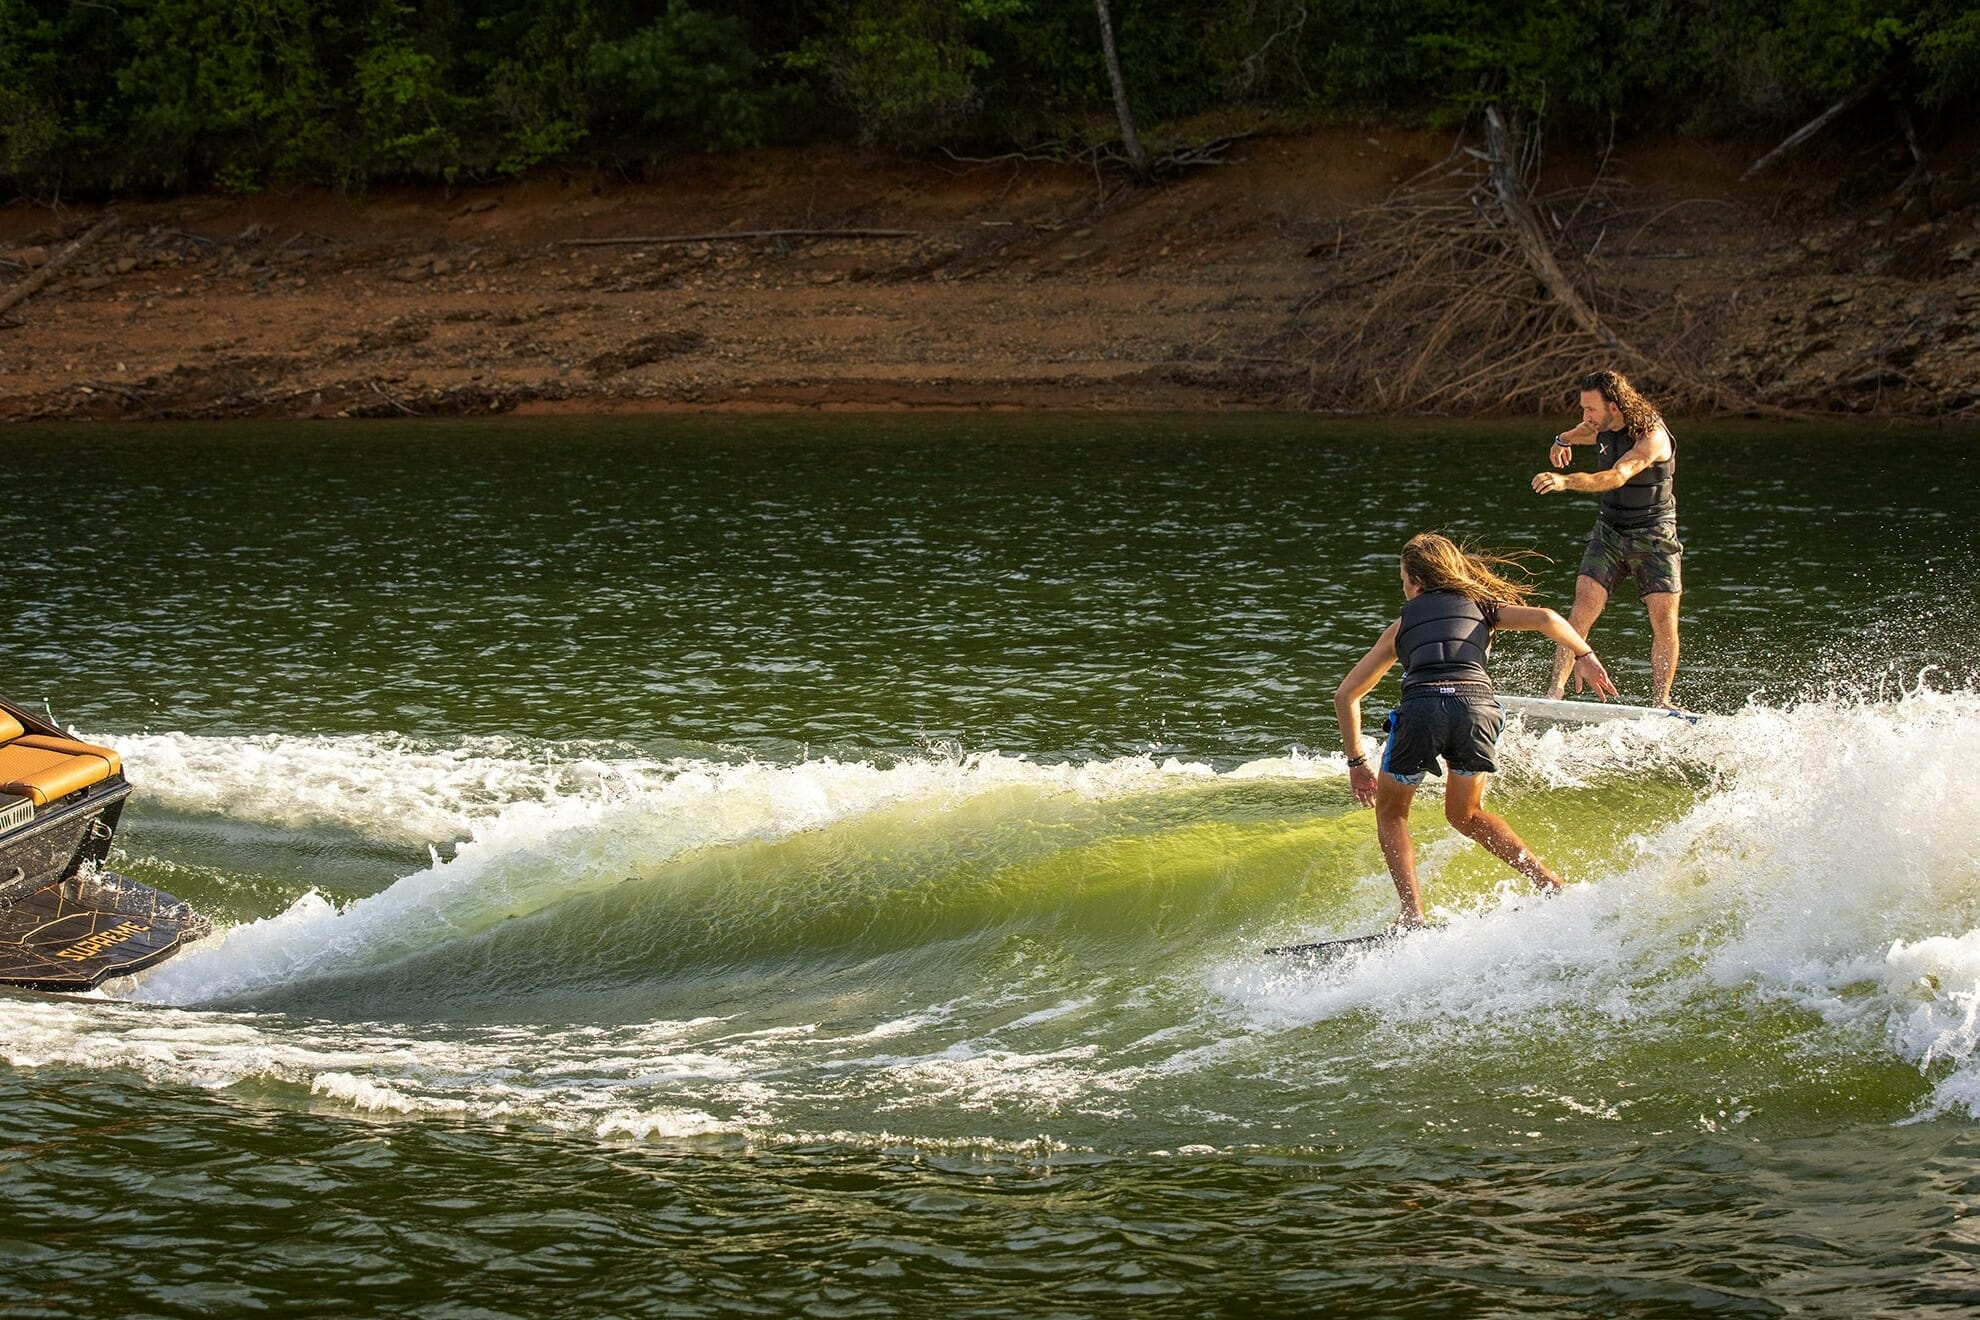 Two people riding Supreme surfboards on a boat.